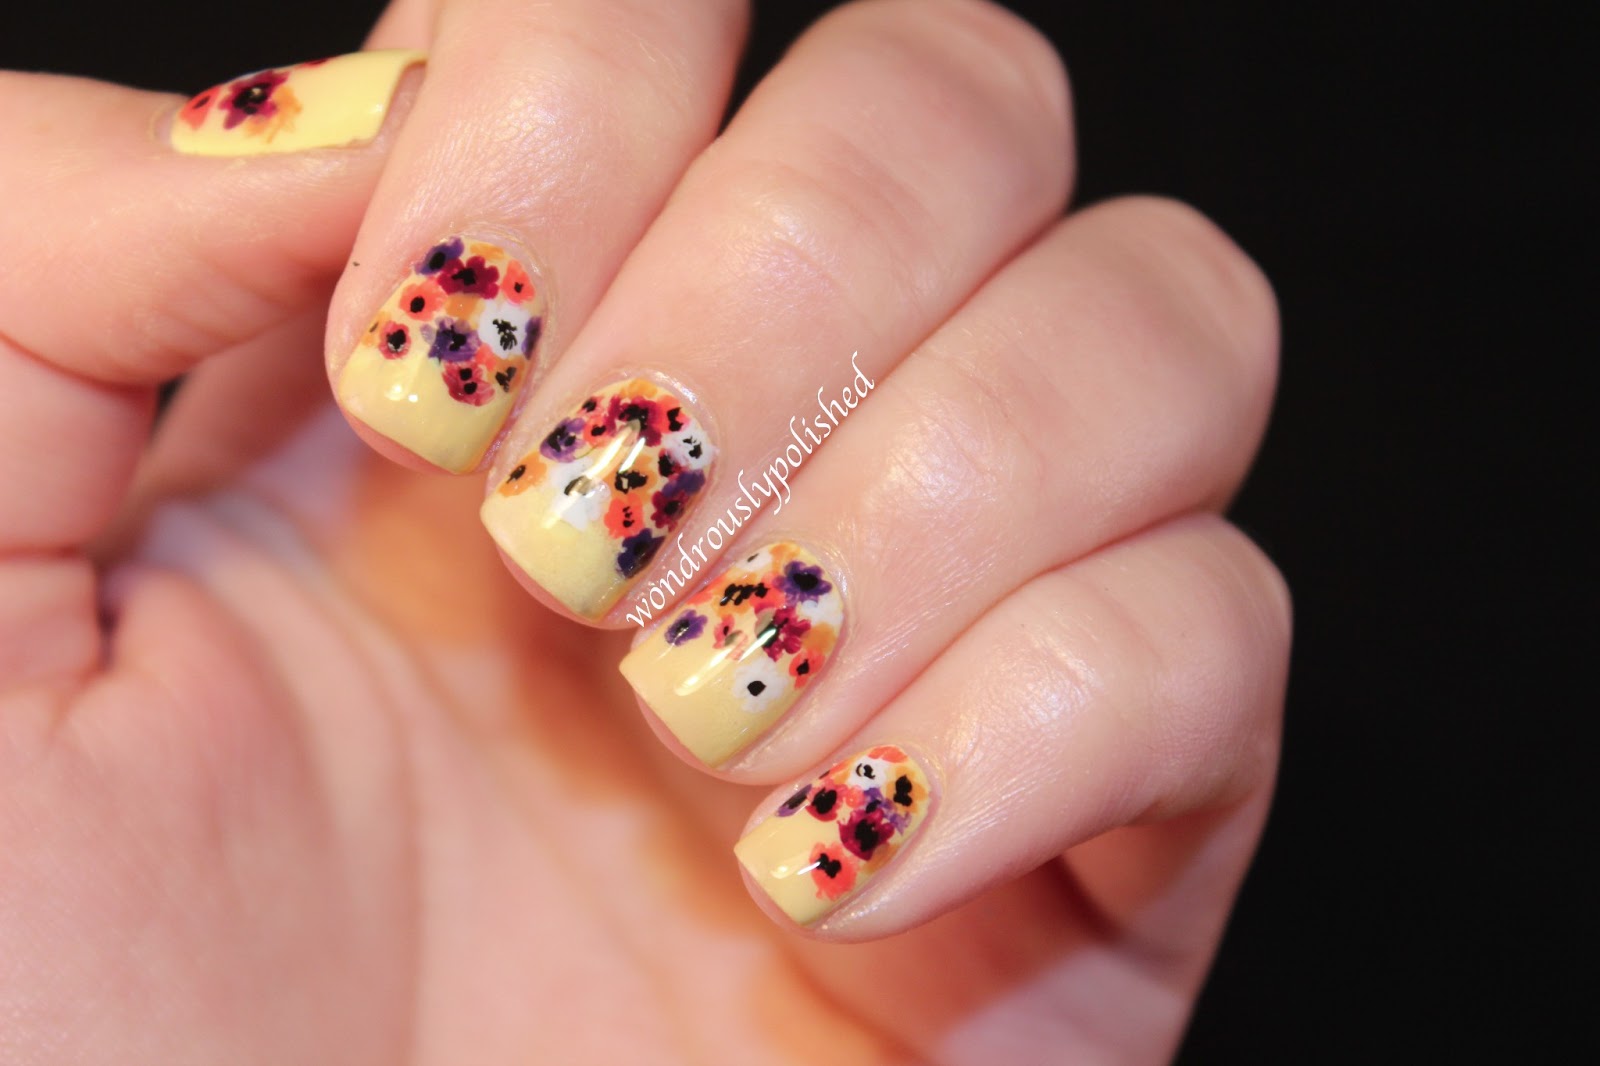 6. Gorgeous Flower Nail Art for Summer - wide 11